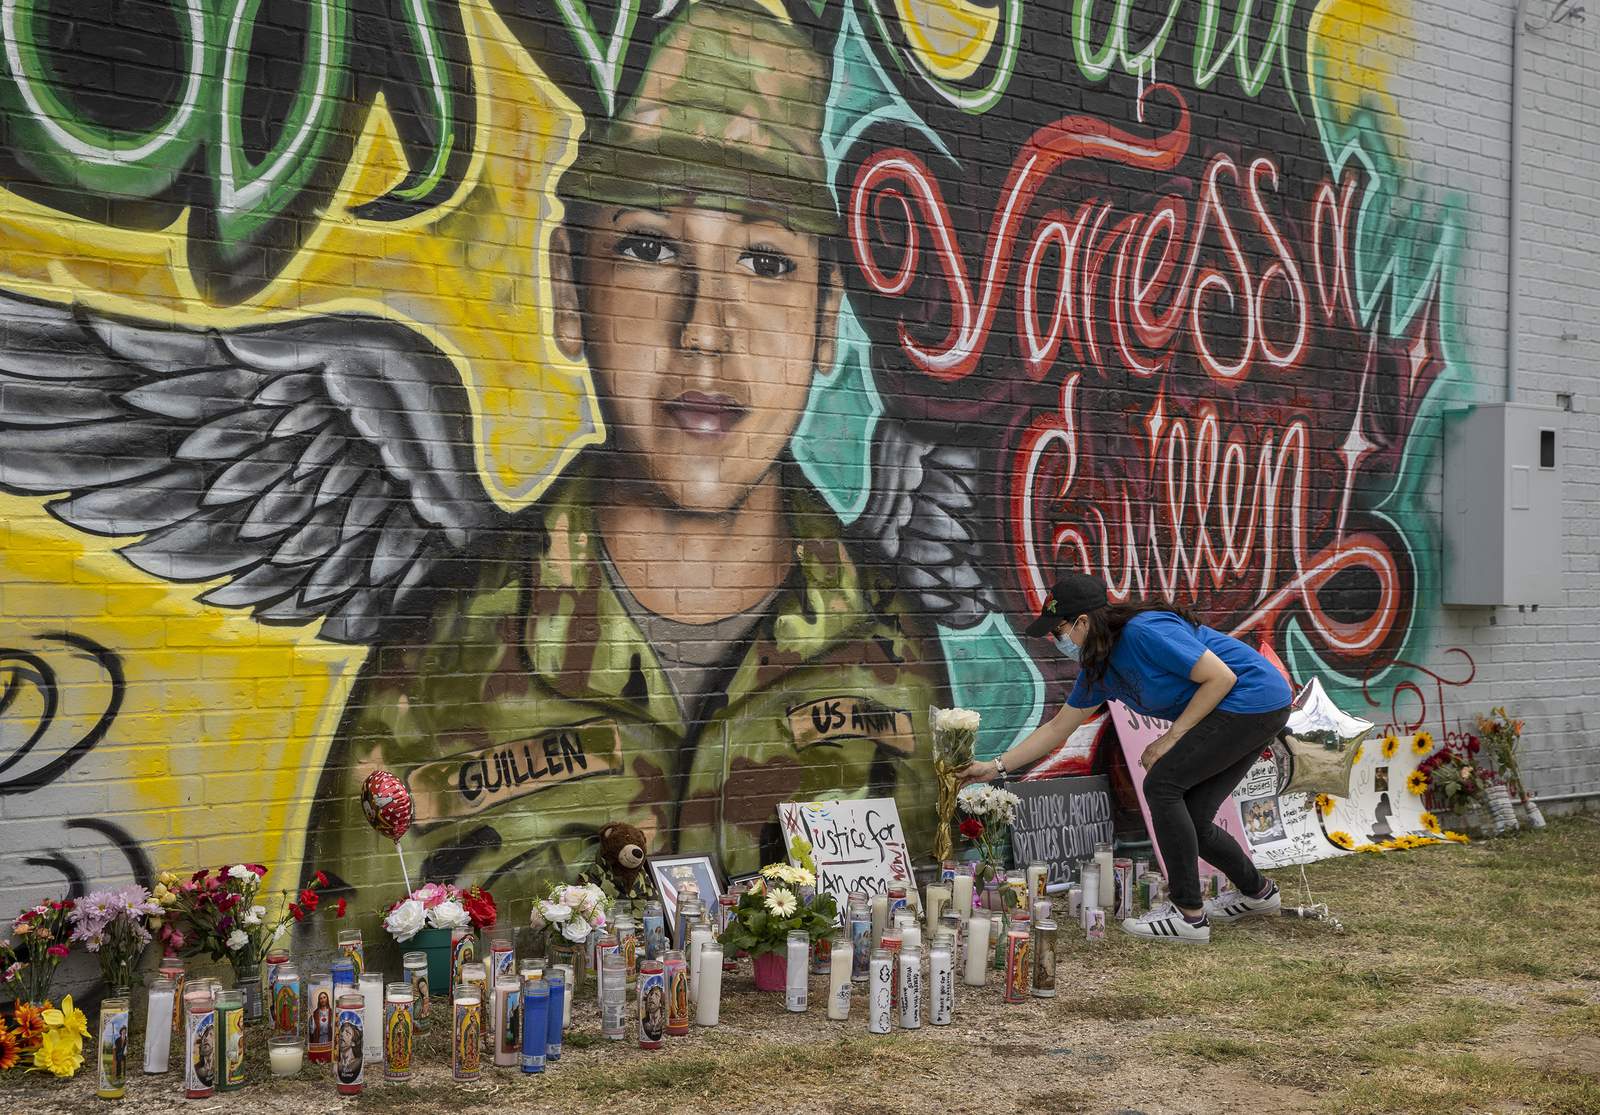 Vanessa Guillen murals: These are the artistic remembrances of the Fort Hood soldier across Texas